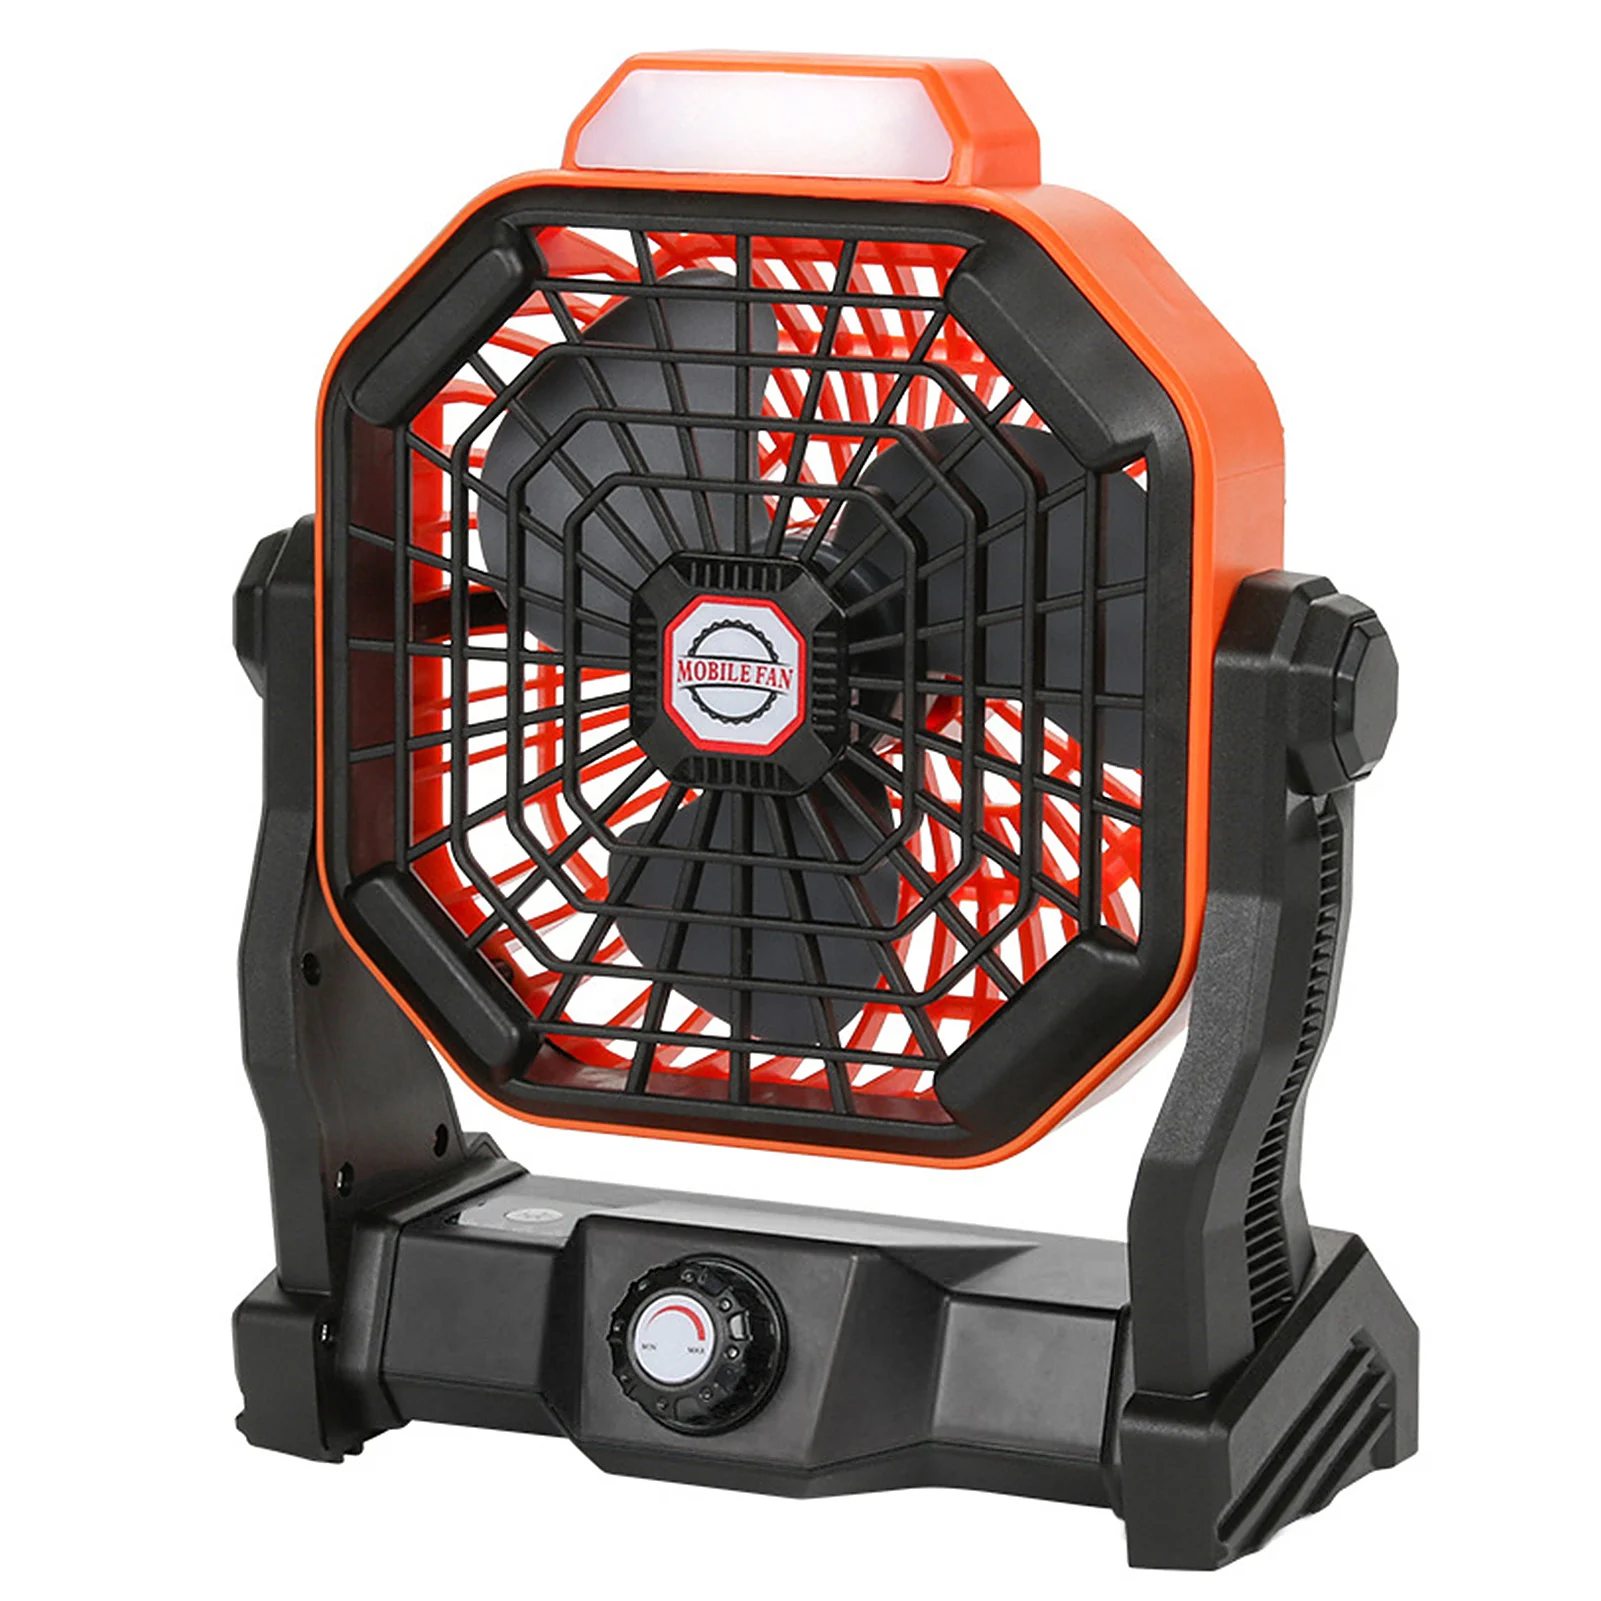 

Camping Portable Rechargeable Lantern Fan Rotatable Desk Fan with Light For Home Tents Hiking Climbing Hiking Fishing